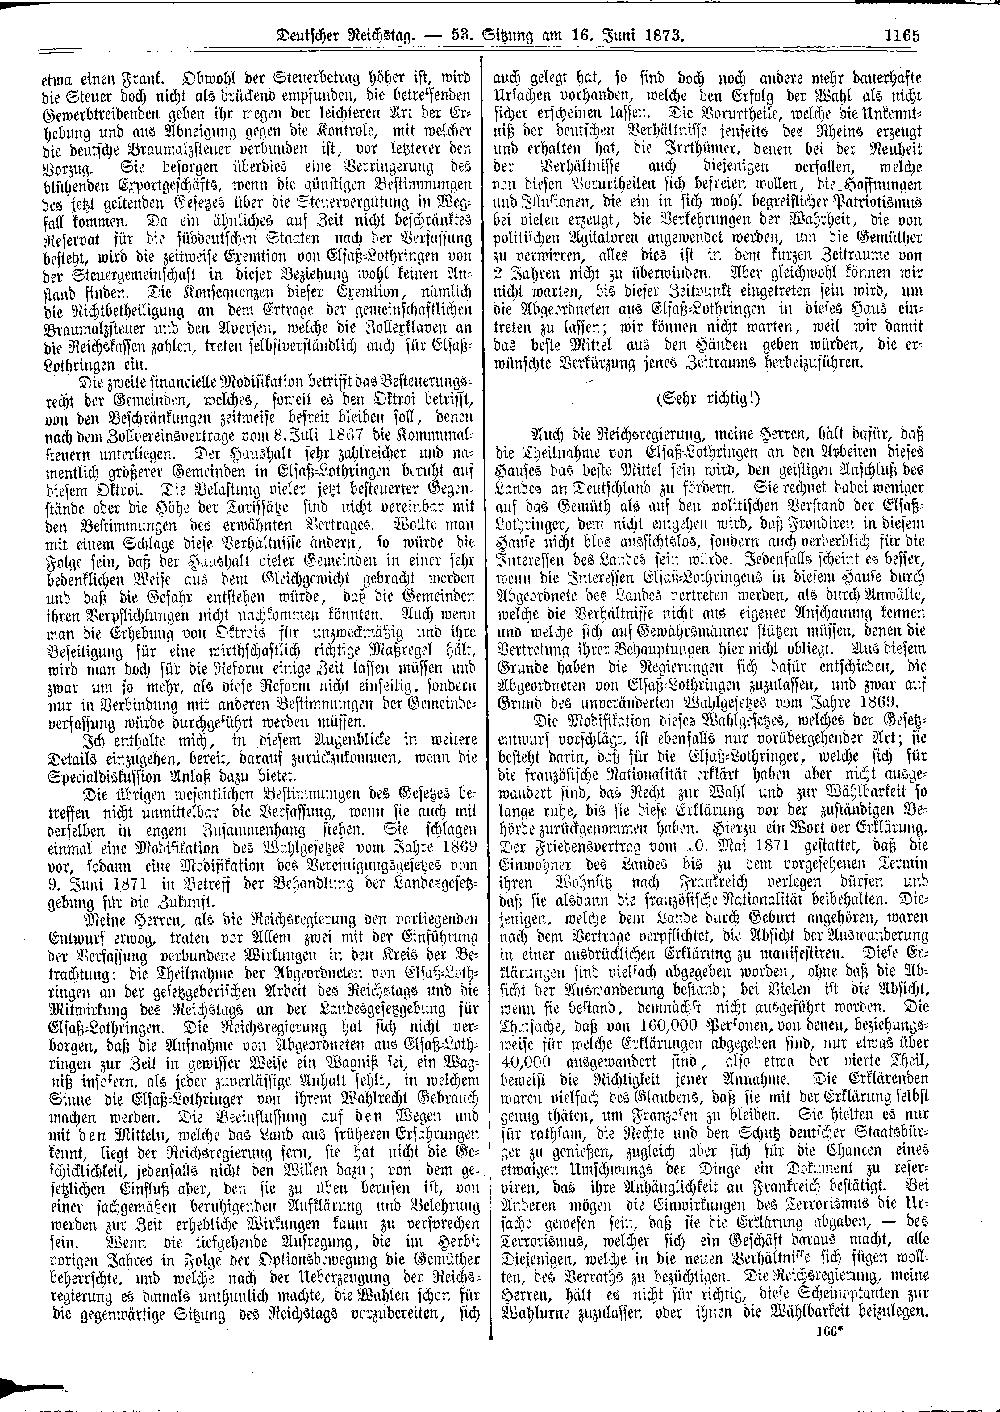 Scan of page 1165